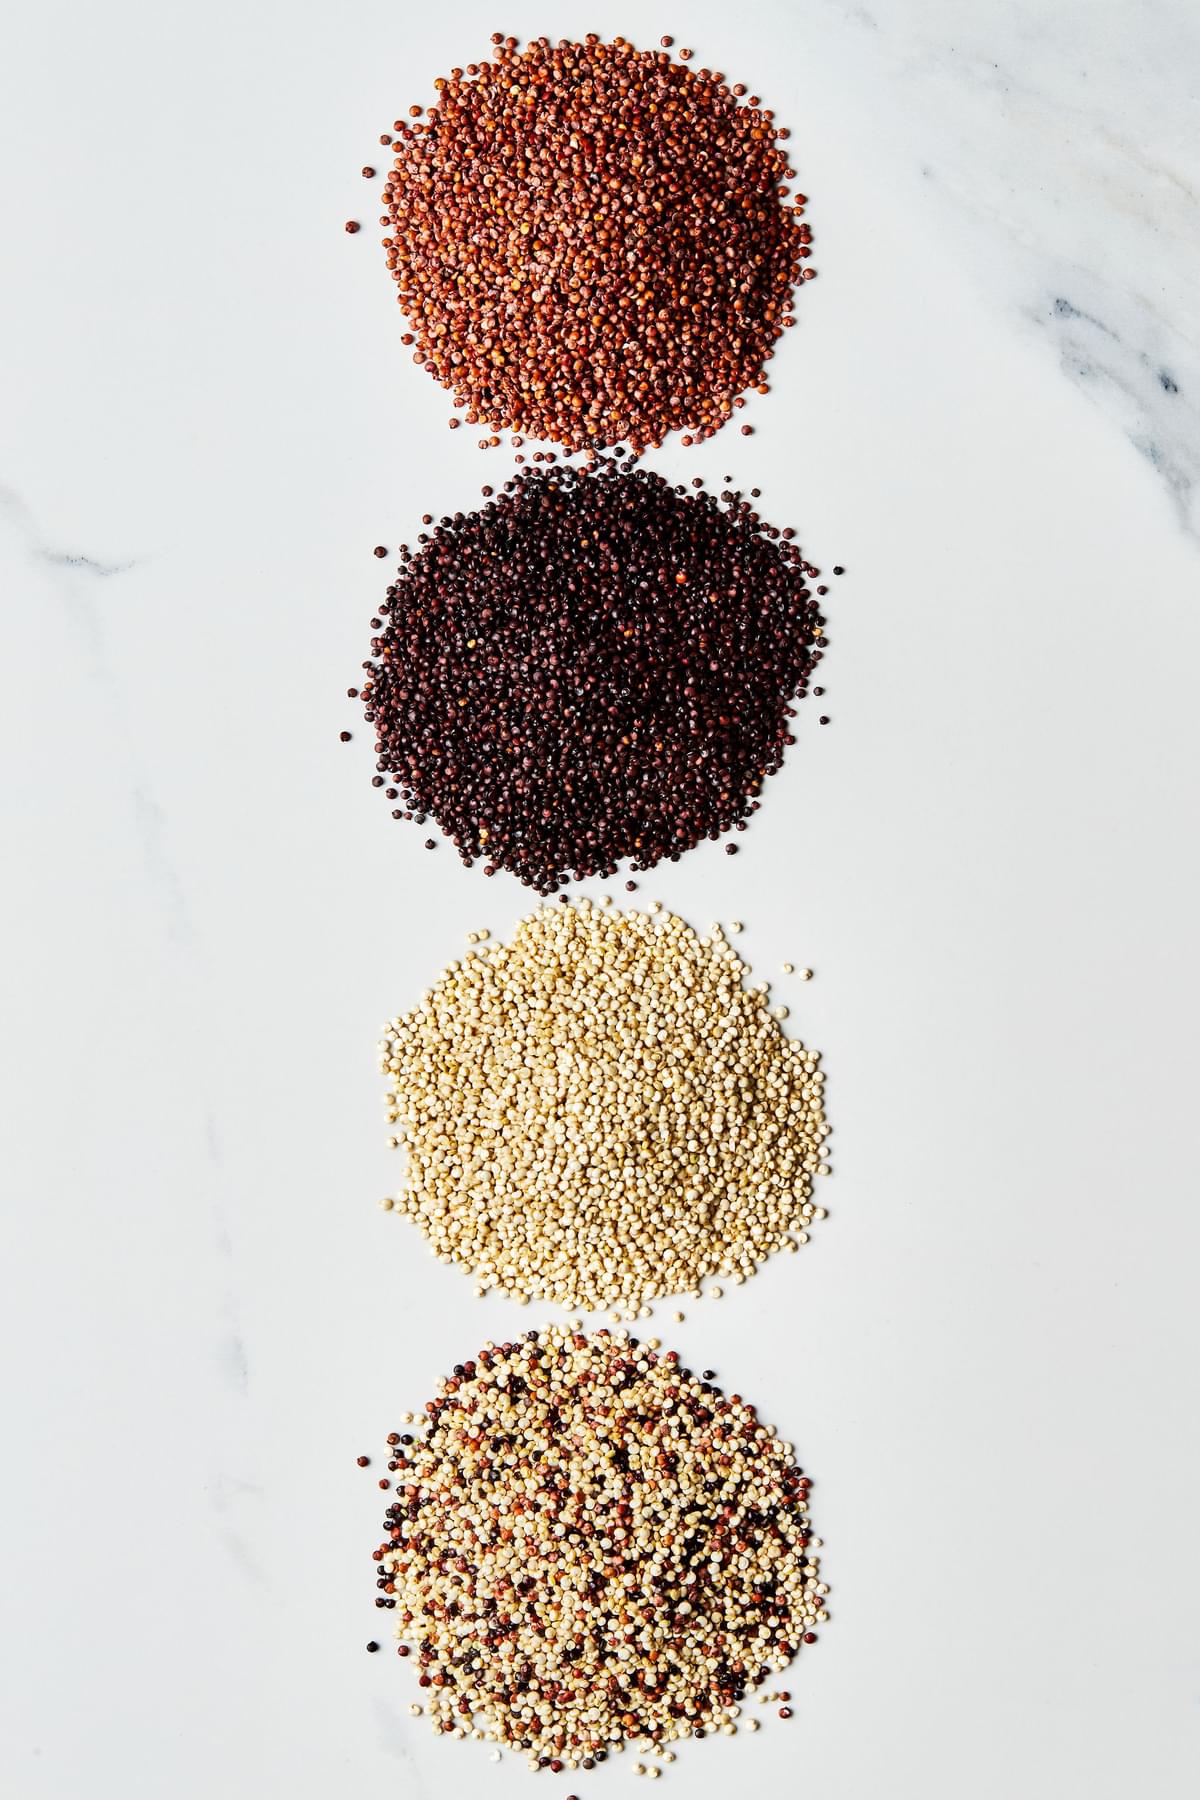 small piles of red, white, black and tri-color quinoa on the counter